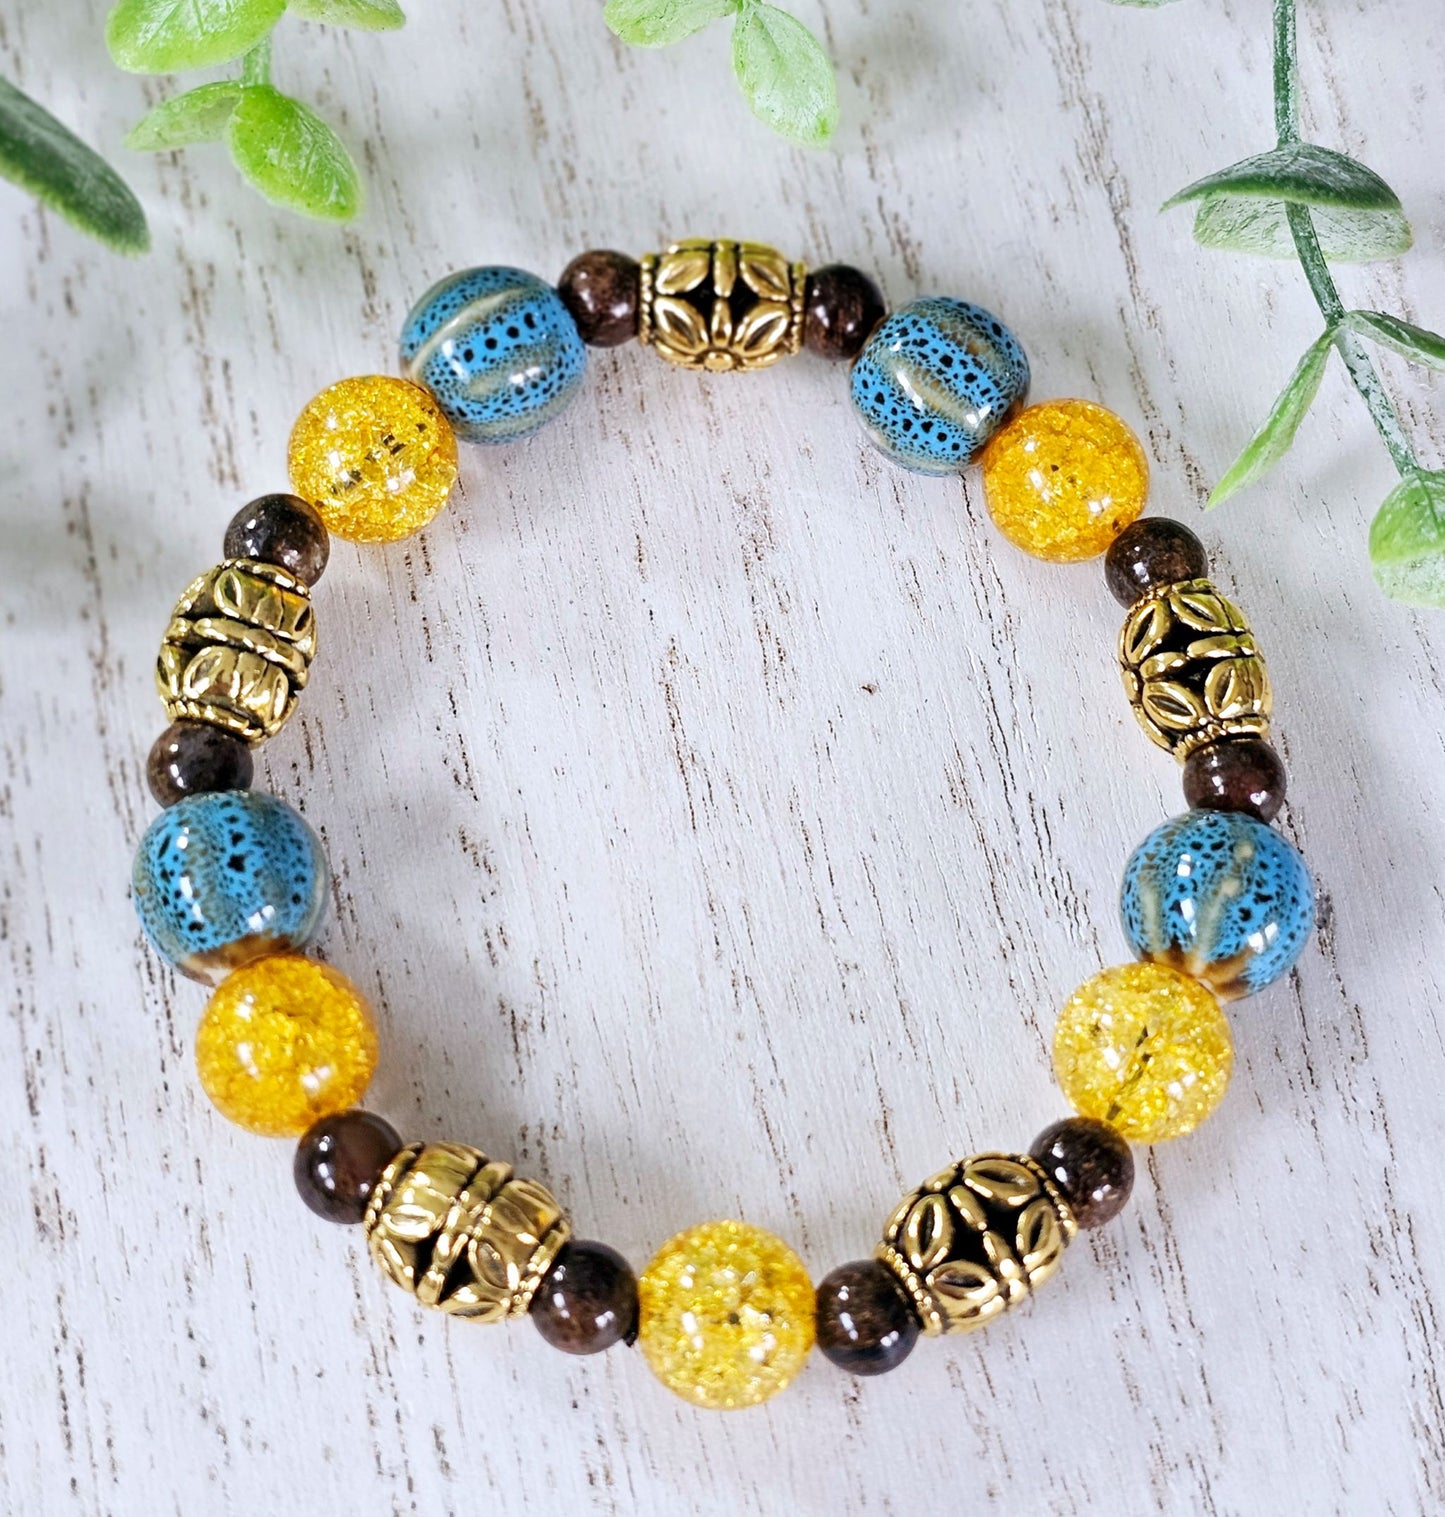 Blue, yellow and gold beaded bracelet